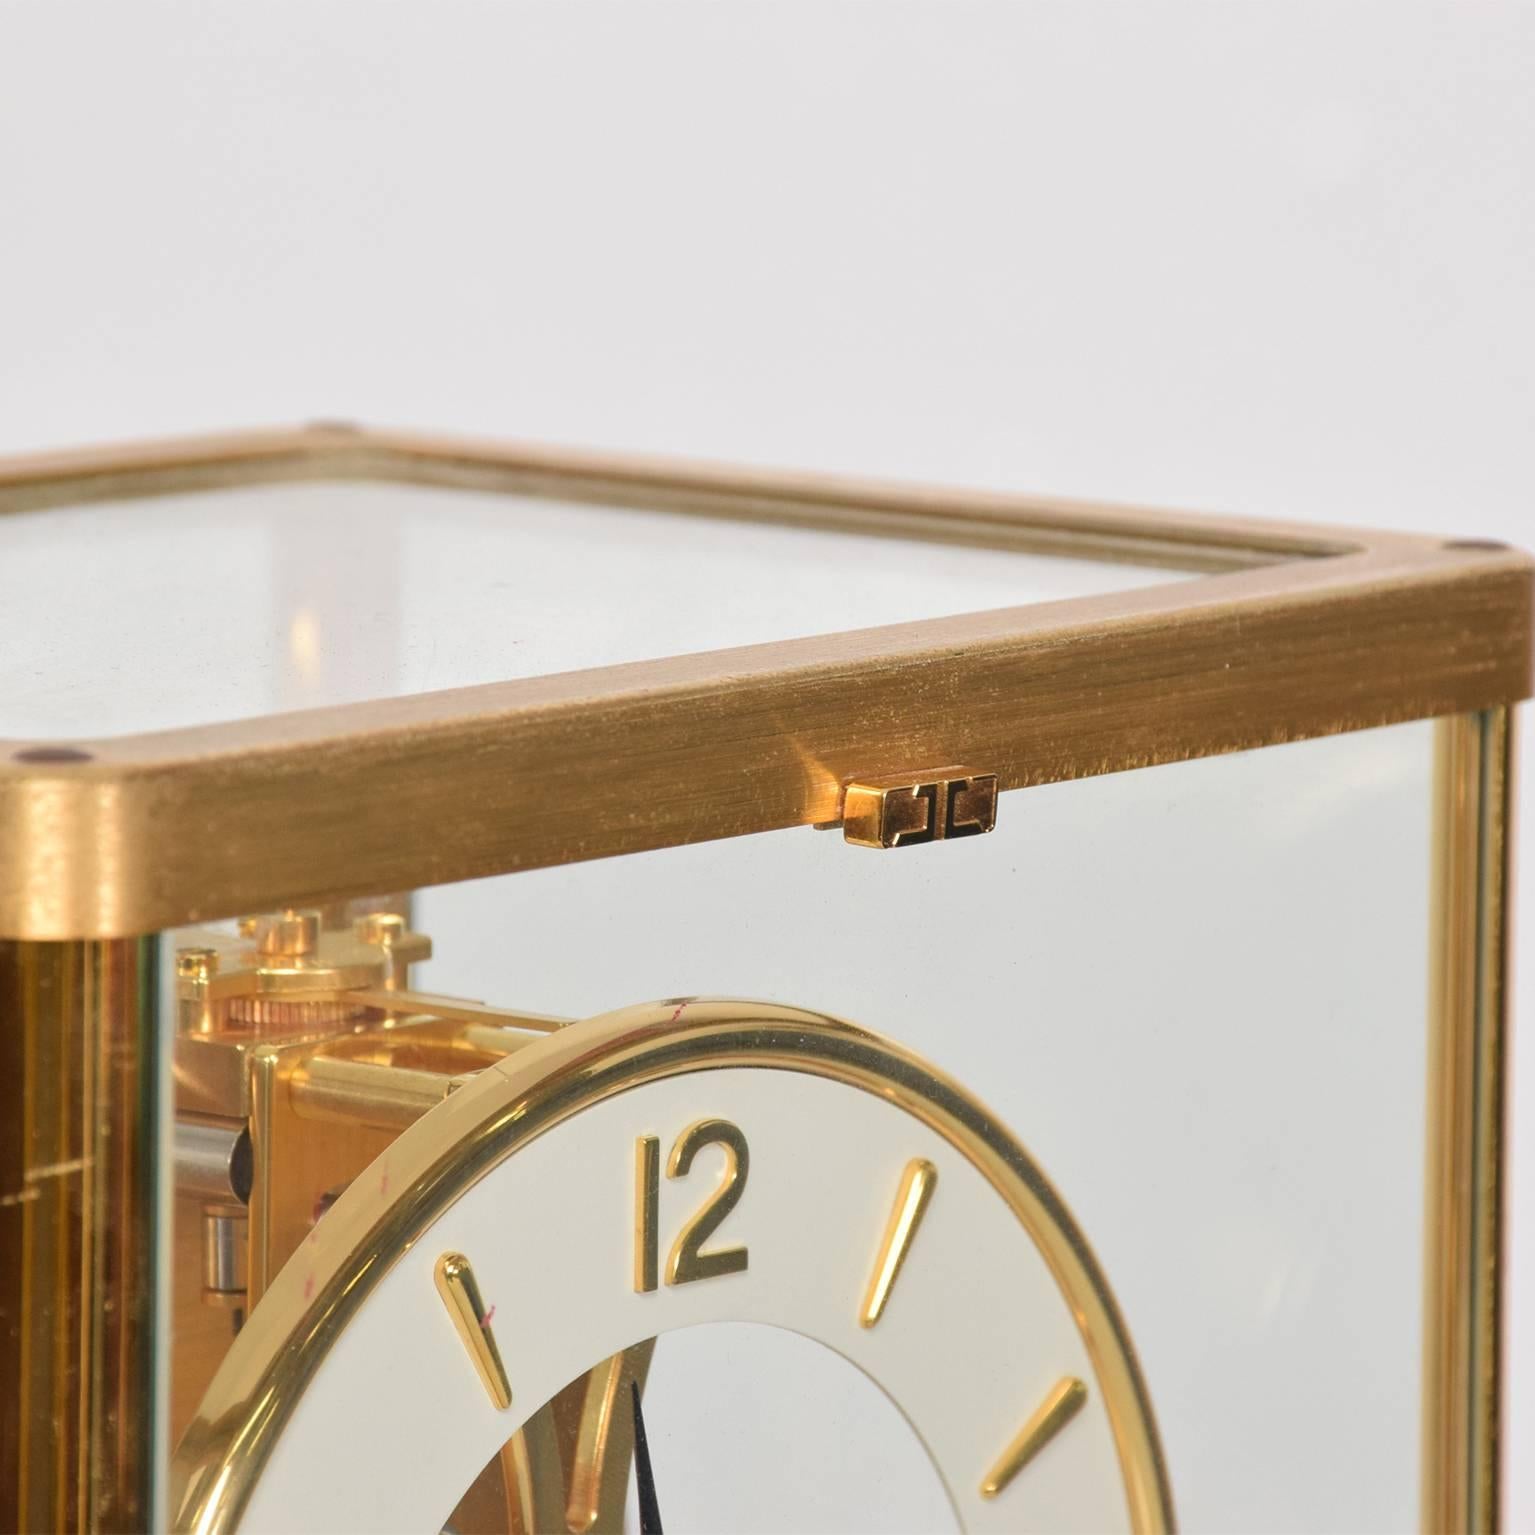 Swiss Atmos Jaeger Le Coultre Mantle Perpetual Motion Clock